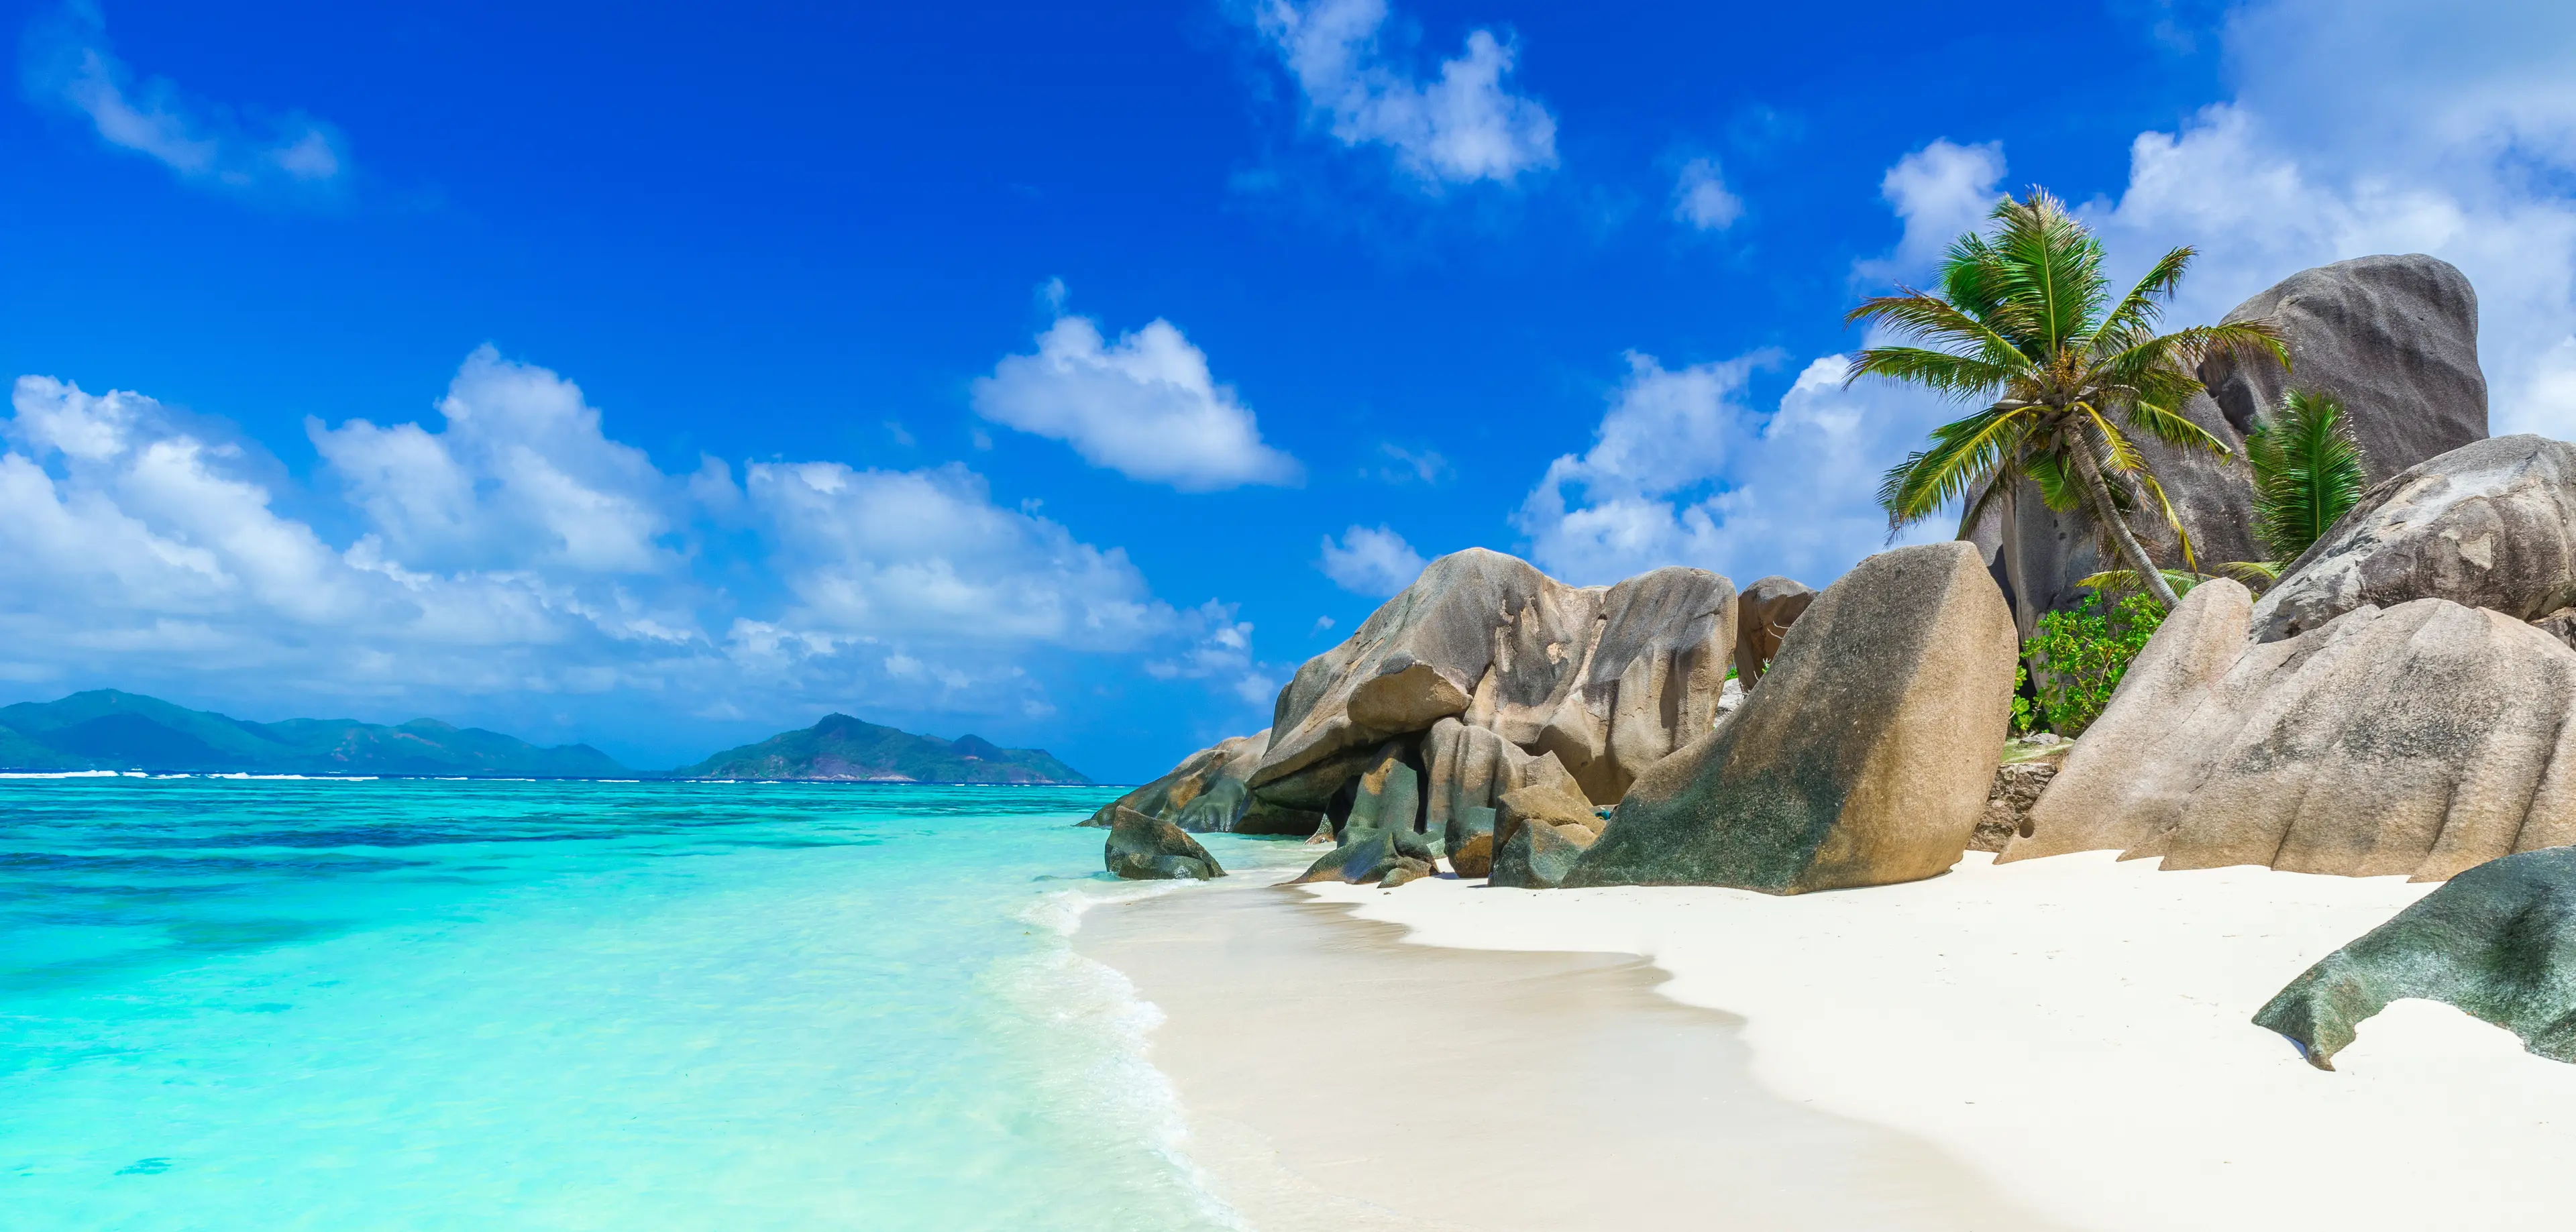 2-Day Solo Food, Wine, and Shopping Adventure in Seychelles